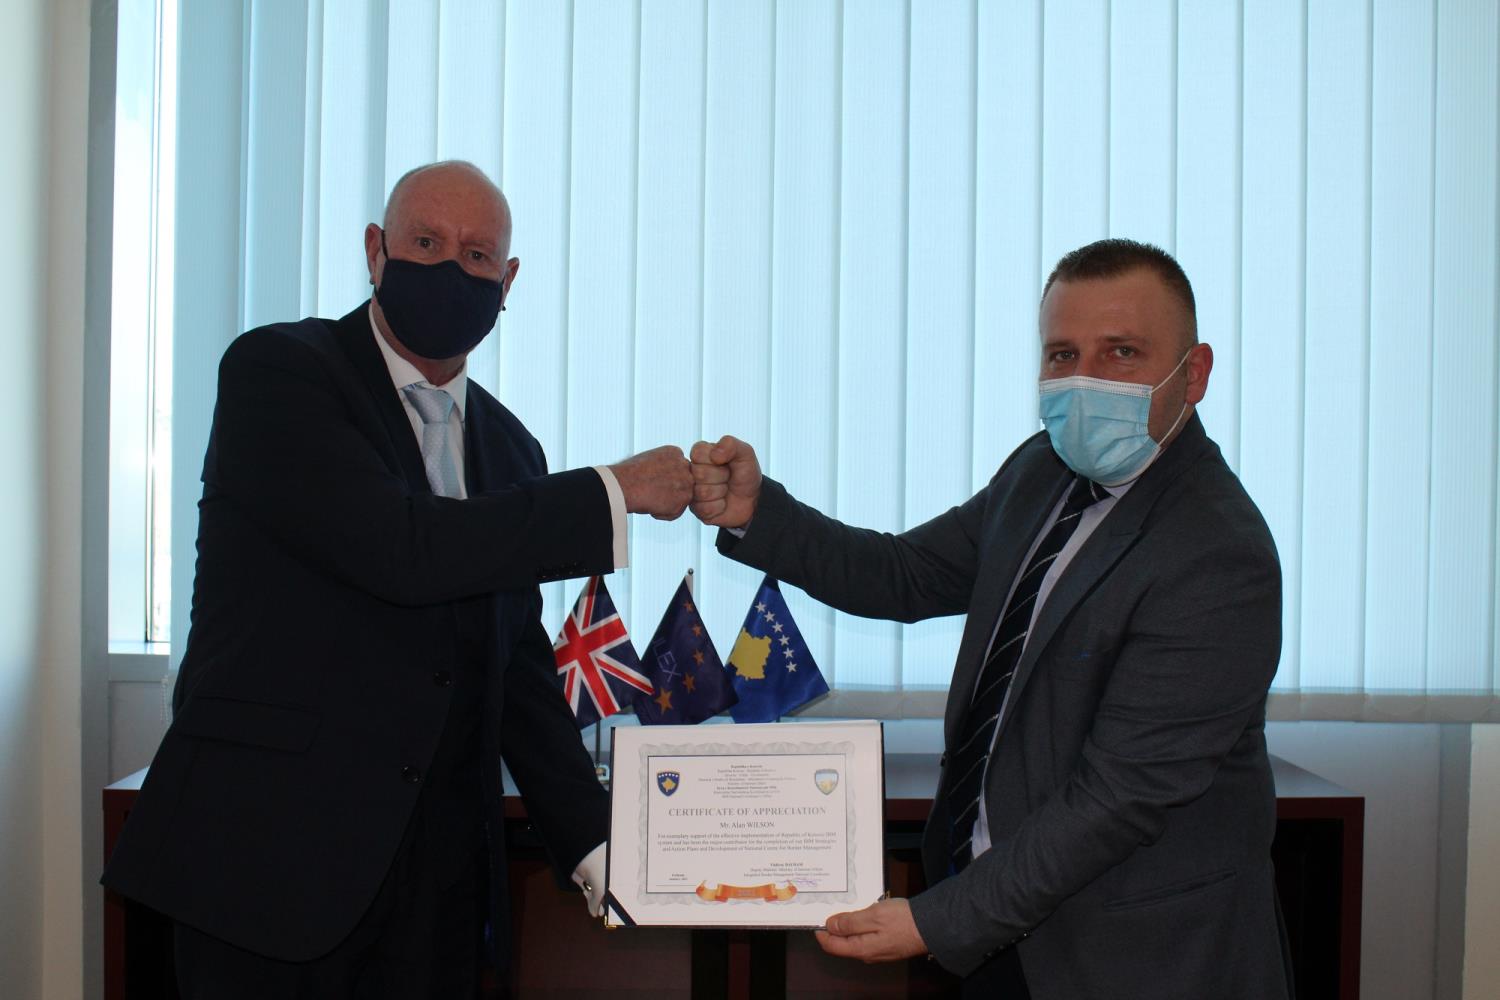 Recognition from partners – EULEX’s Alan Wilson awarded for his outstanding contribution to the Ministry of Internal Affairs and the Kosovo Customs